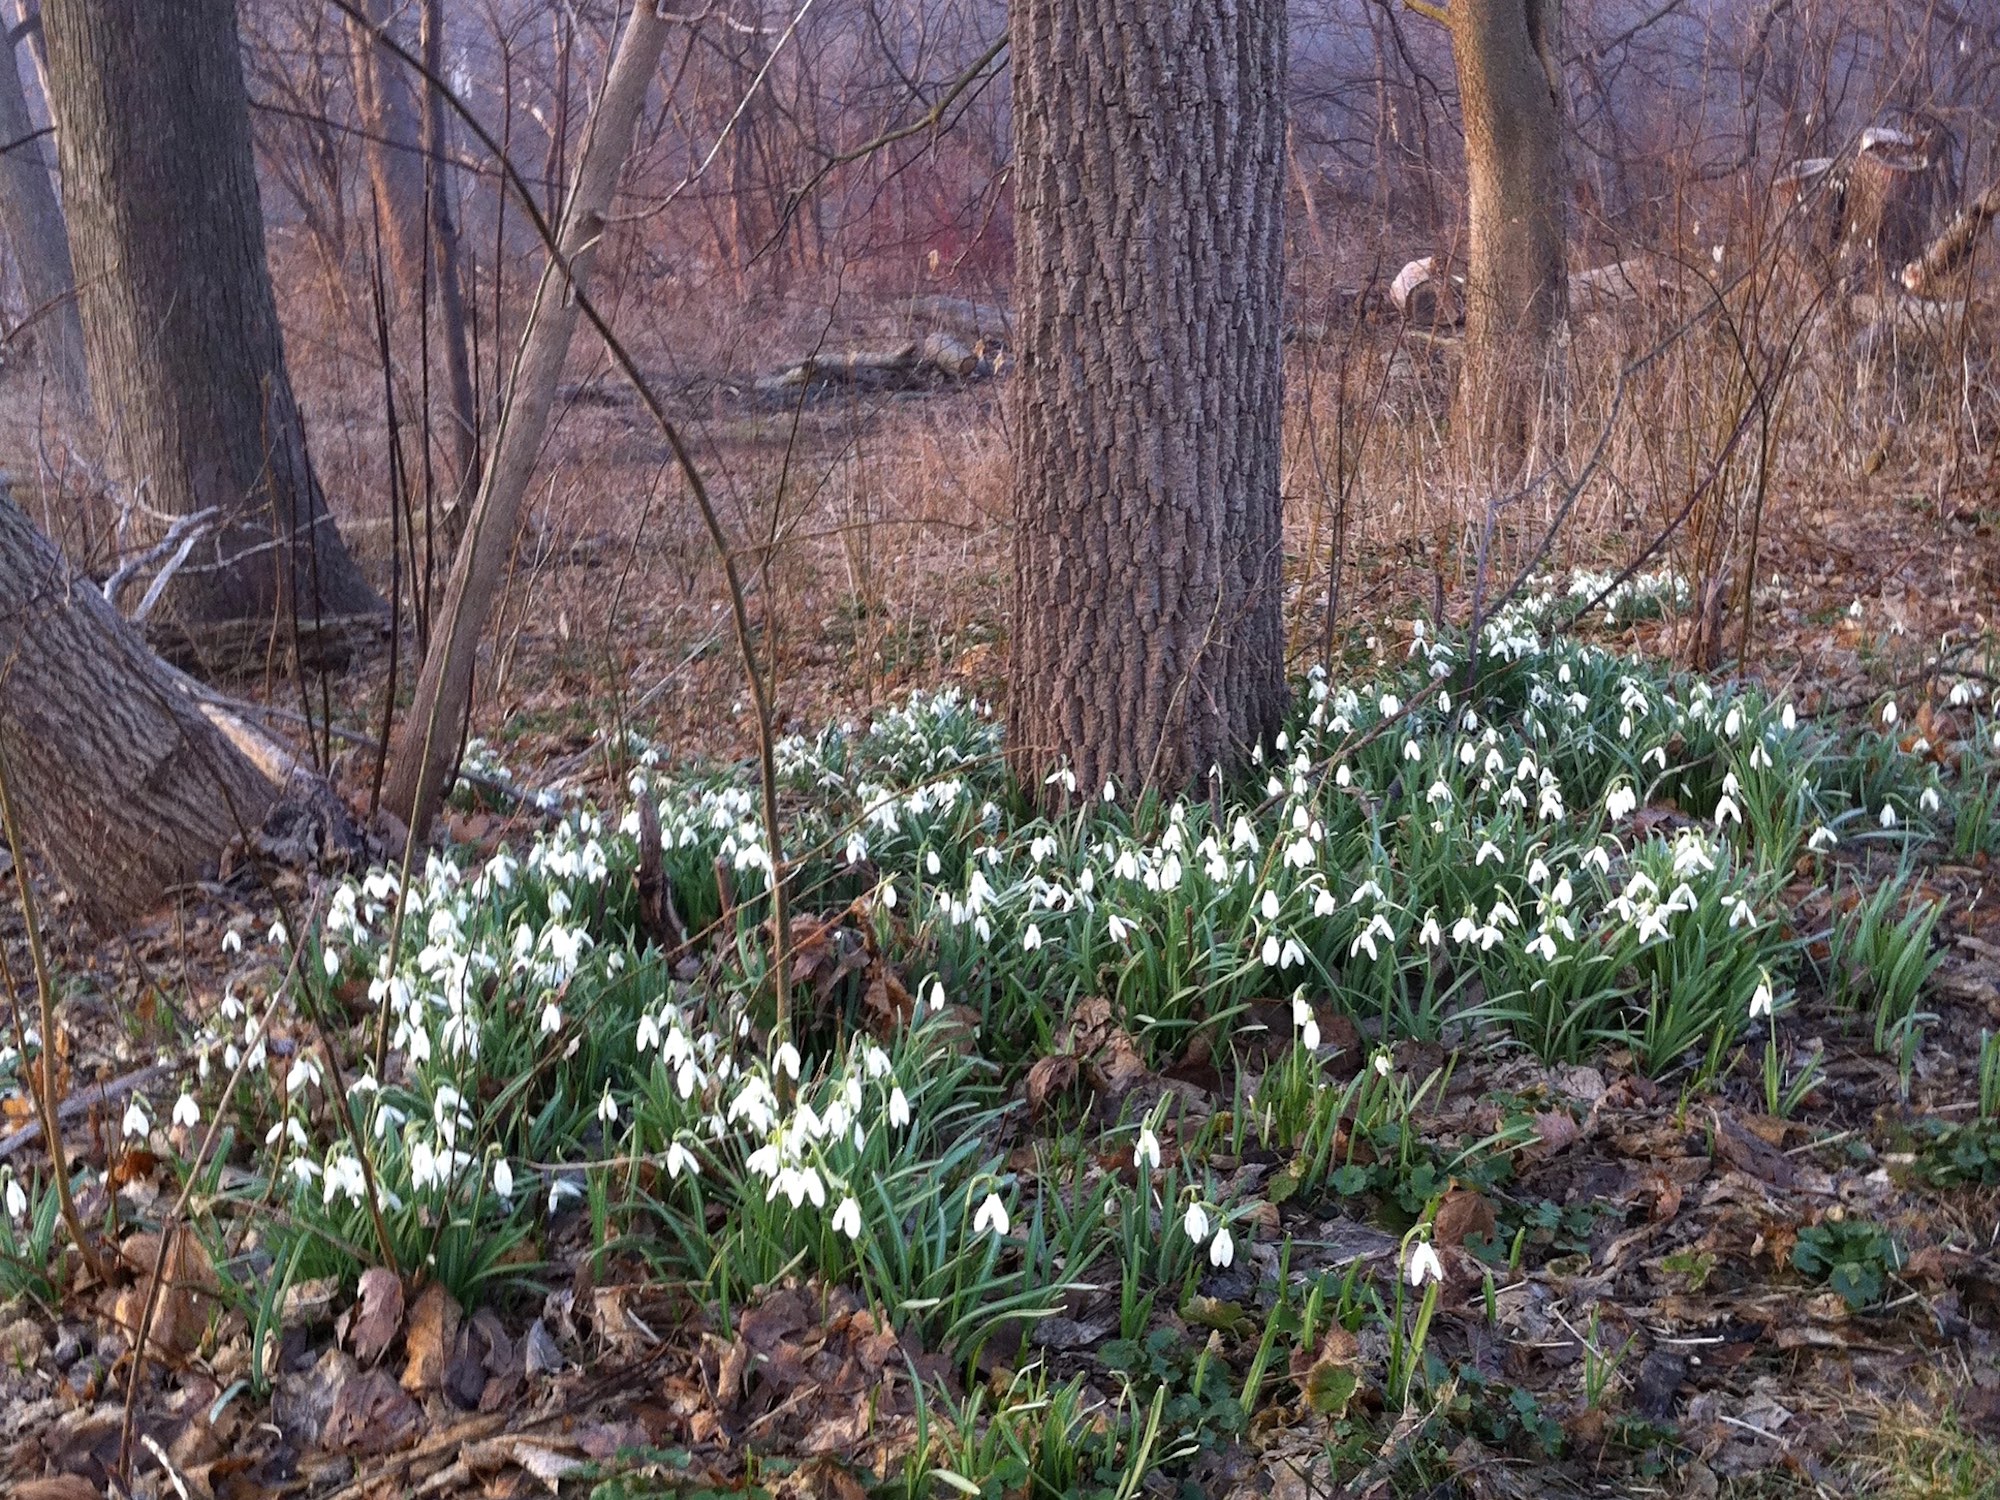 Snowdrops in woods between the Sycamore Tree on Arbor Drive and the bike path entrance to the Oak Savanna on March 15, 2012.